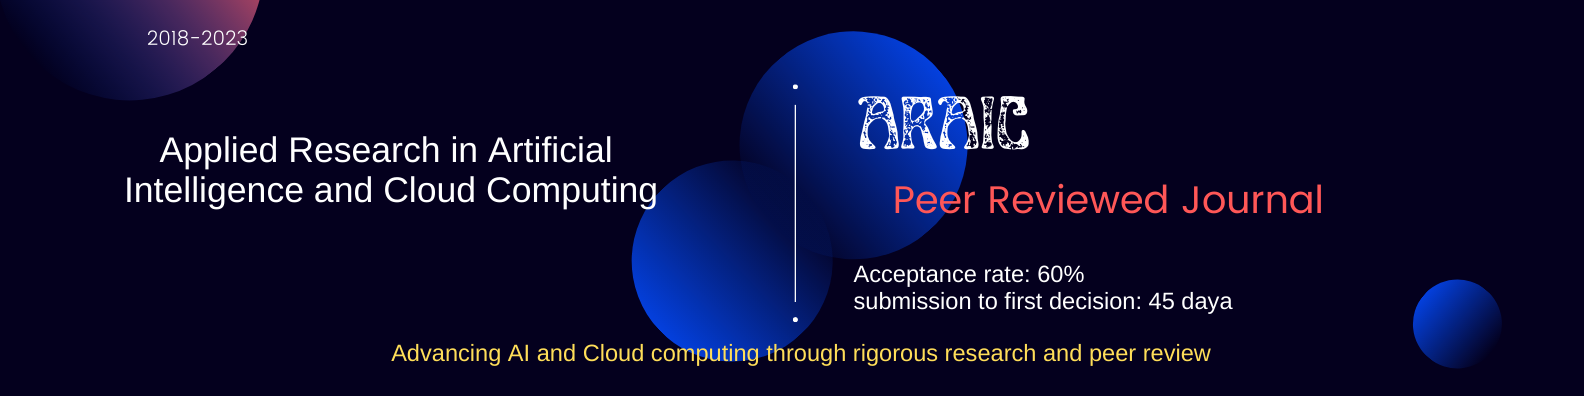 Applied Research in Artificial Intelligence and Cloud Computing